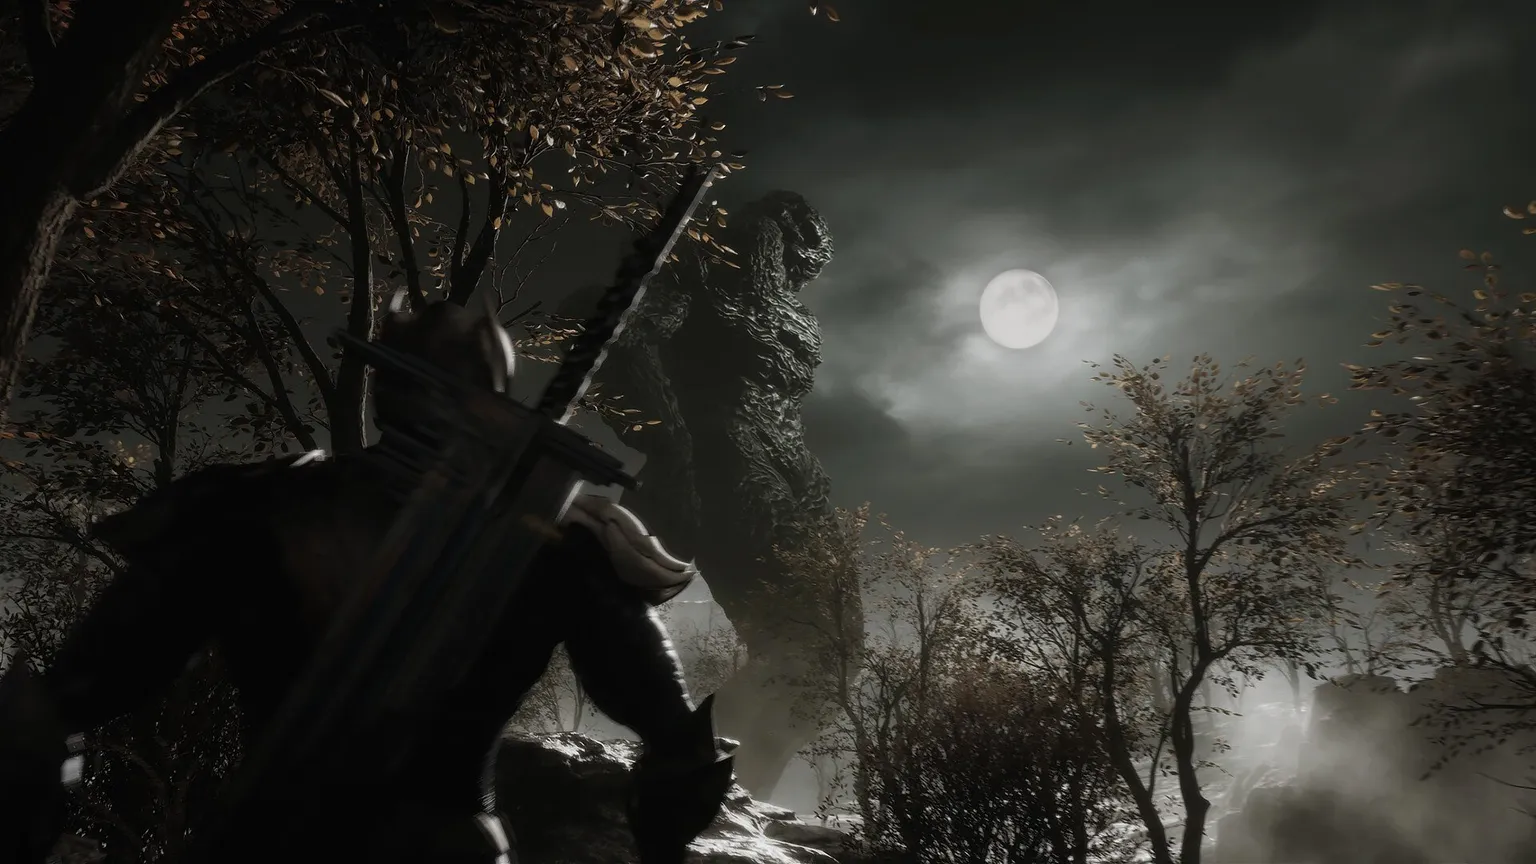 Screenshot showing character with sword looking up at dark cloudy sky with full moon and massive, stone-like godzilla type of creature above him.